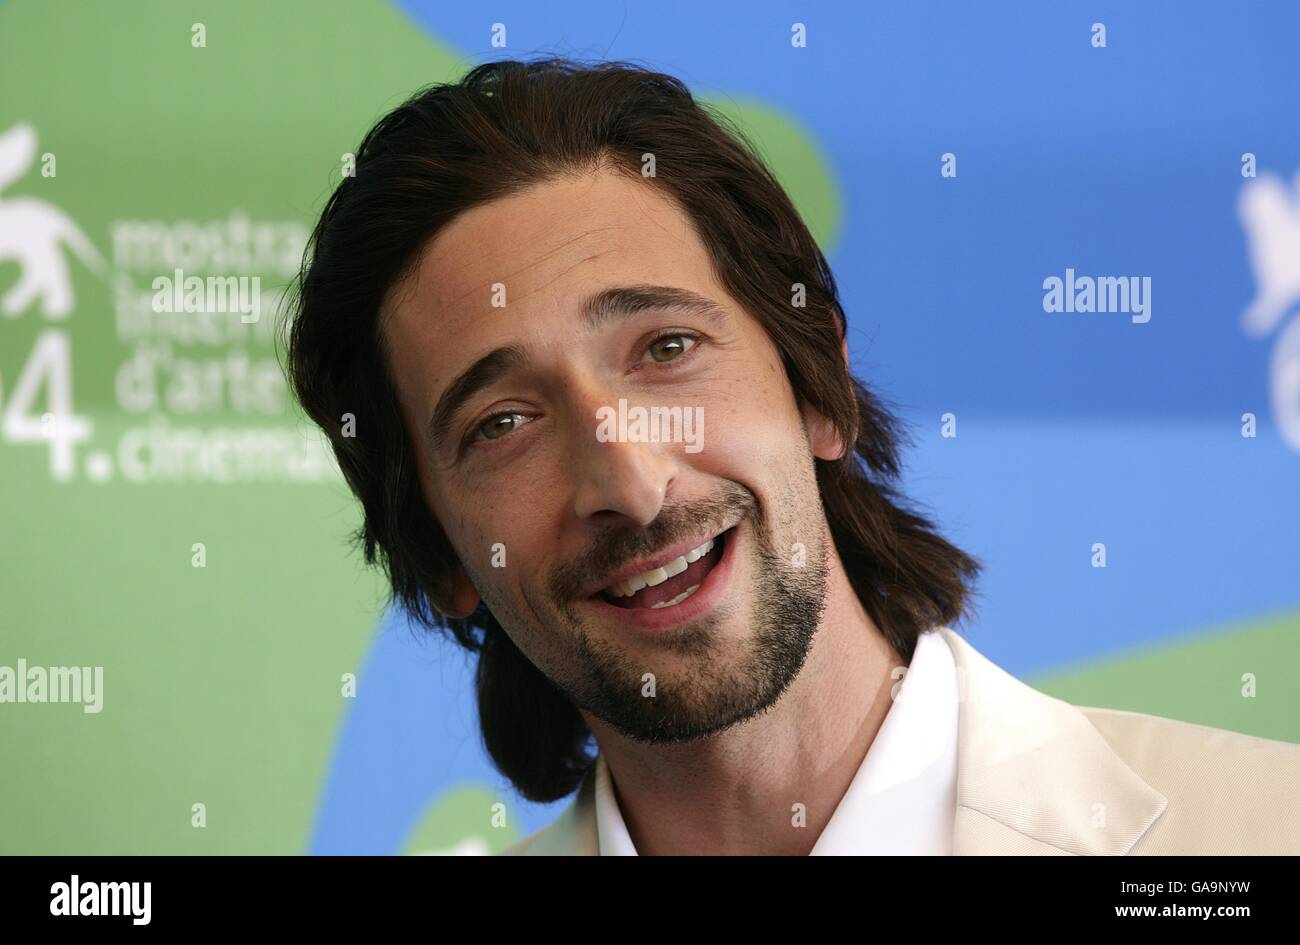 Adrien Brody during a photocall for the film 'The Darjeeling Limited', at the Venice Film Festival in Italy Stock Photo